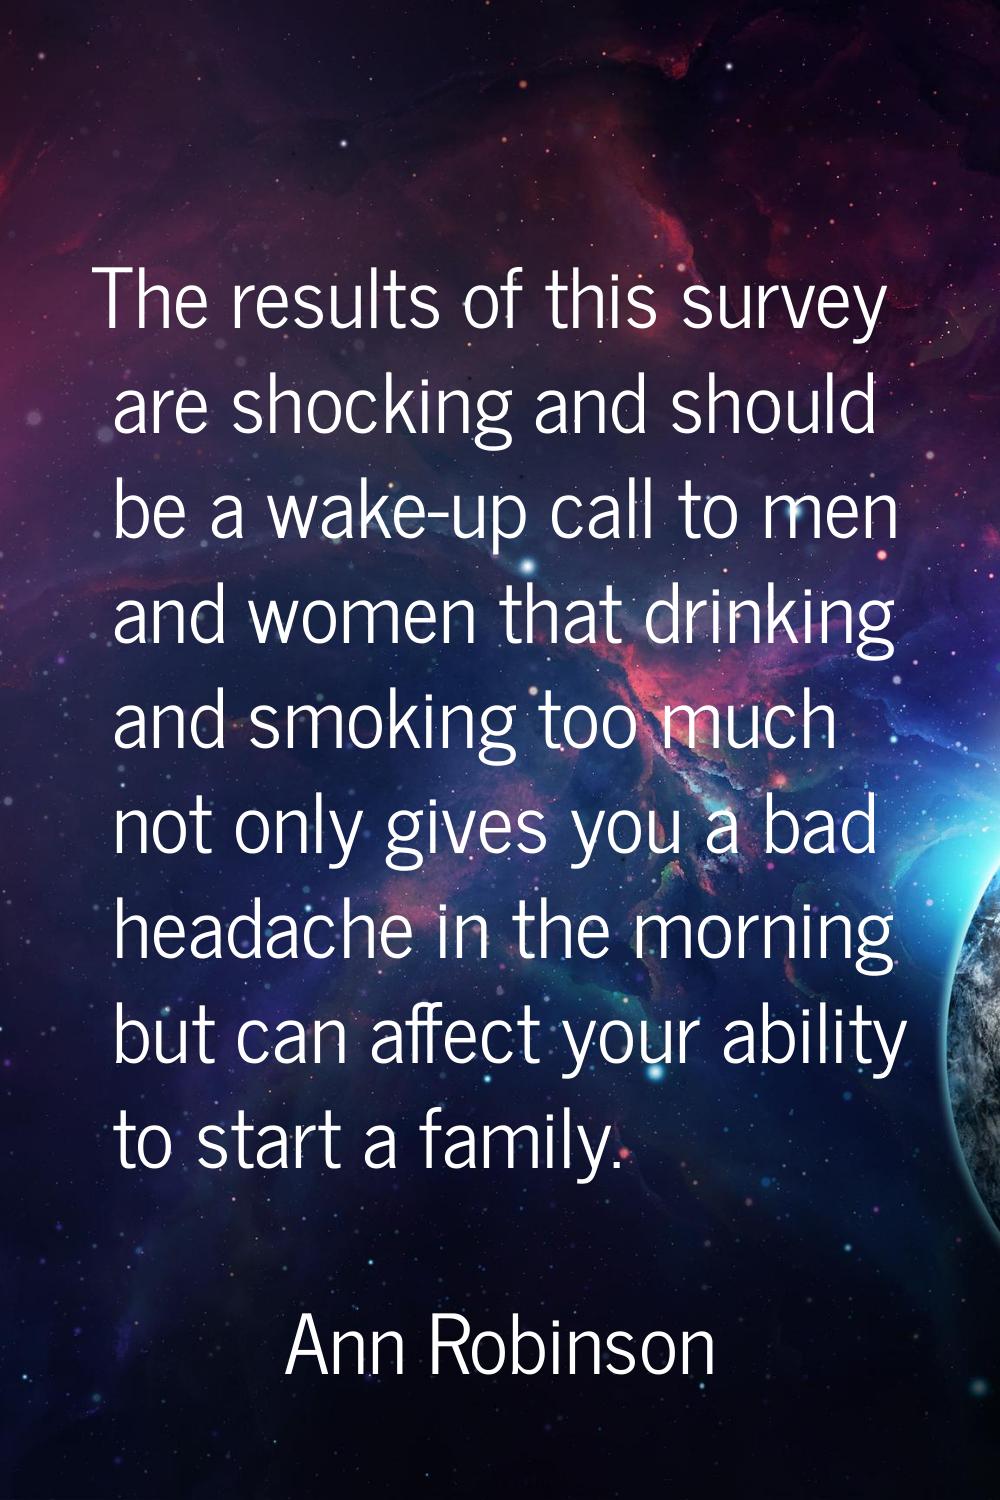 The results of this survey are shocking and should be a wake-up call to men and women that drinking